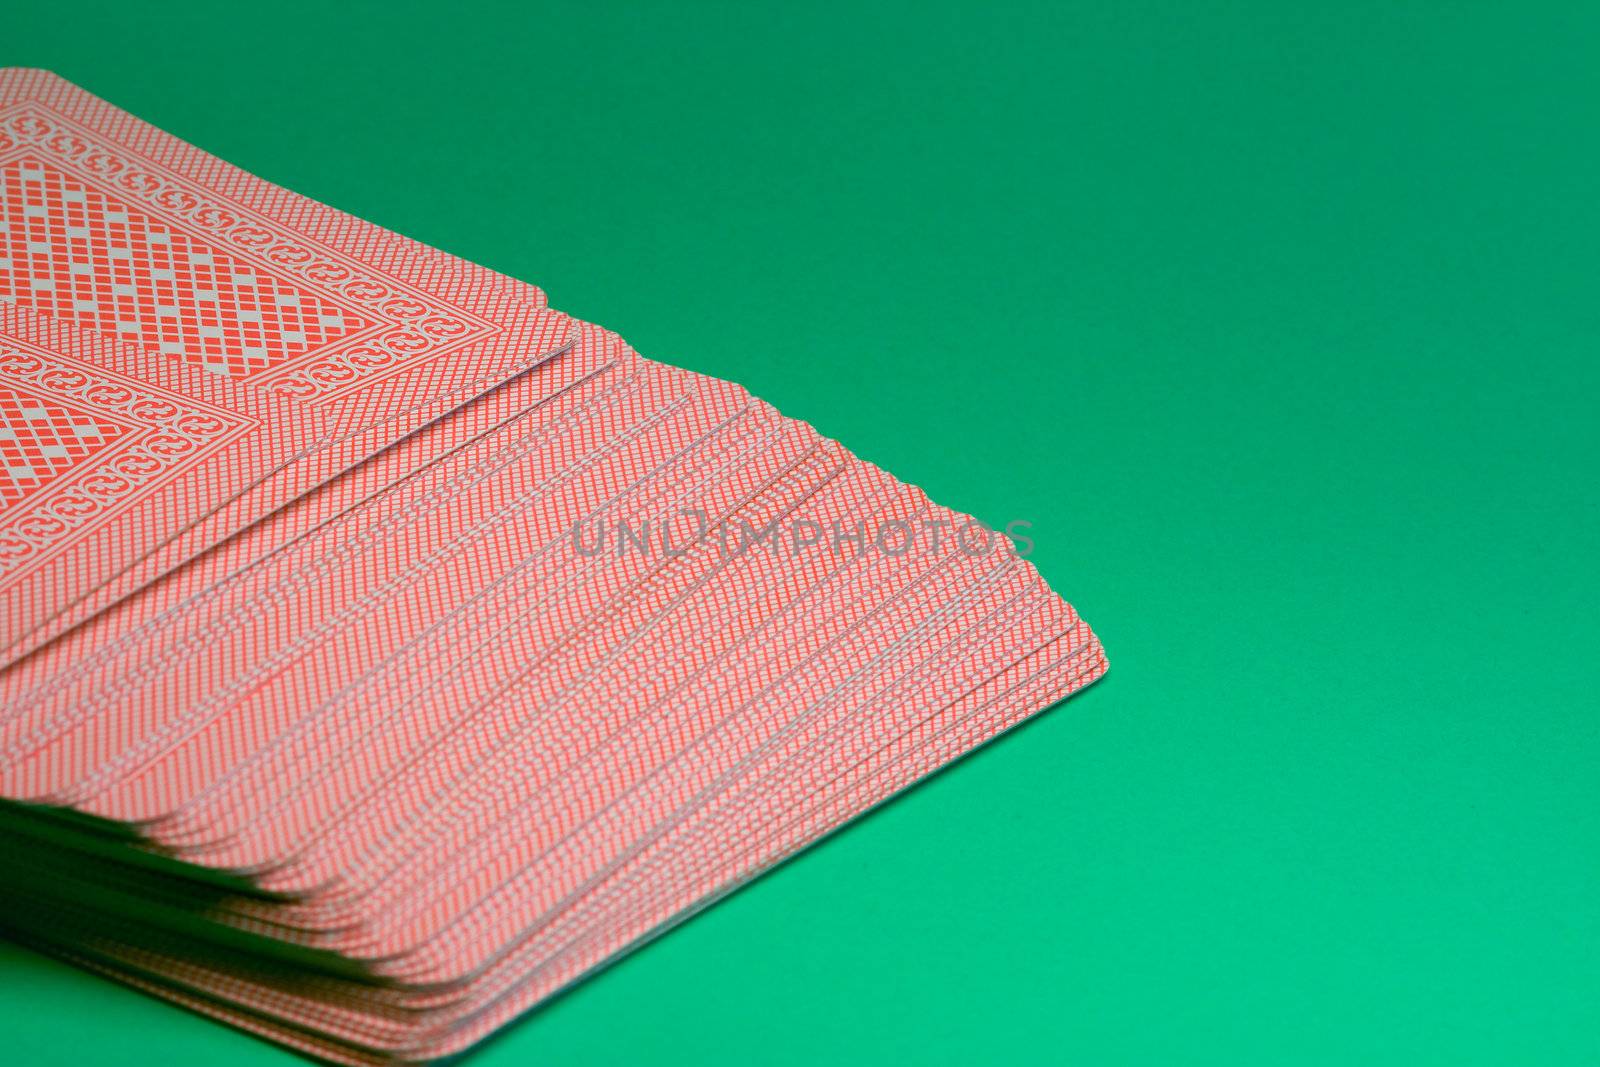 Deck of cards on green table